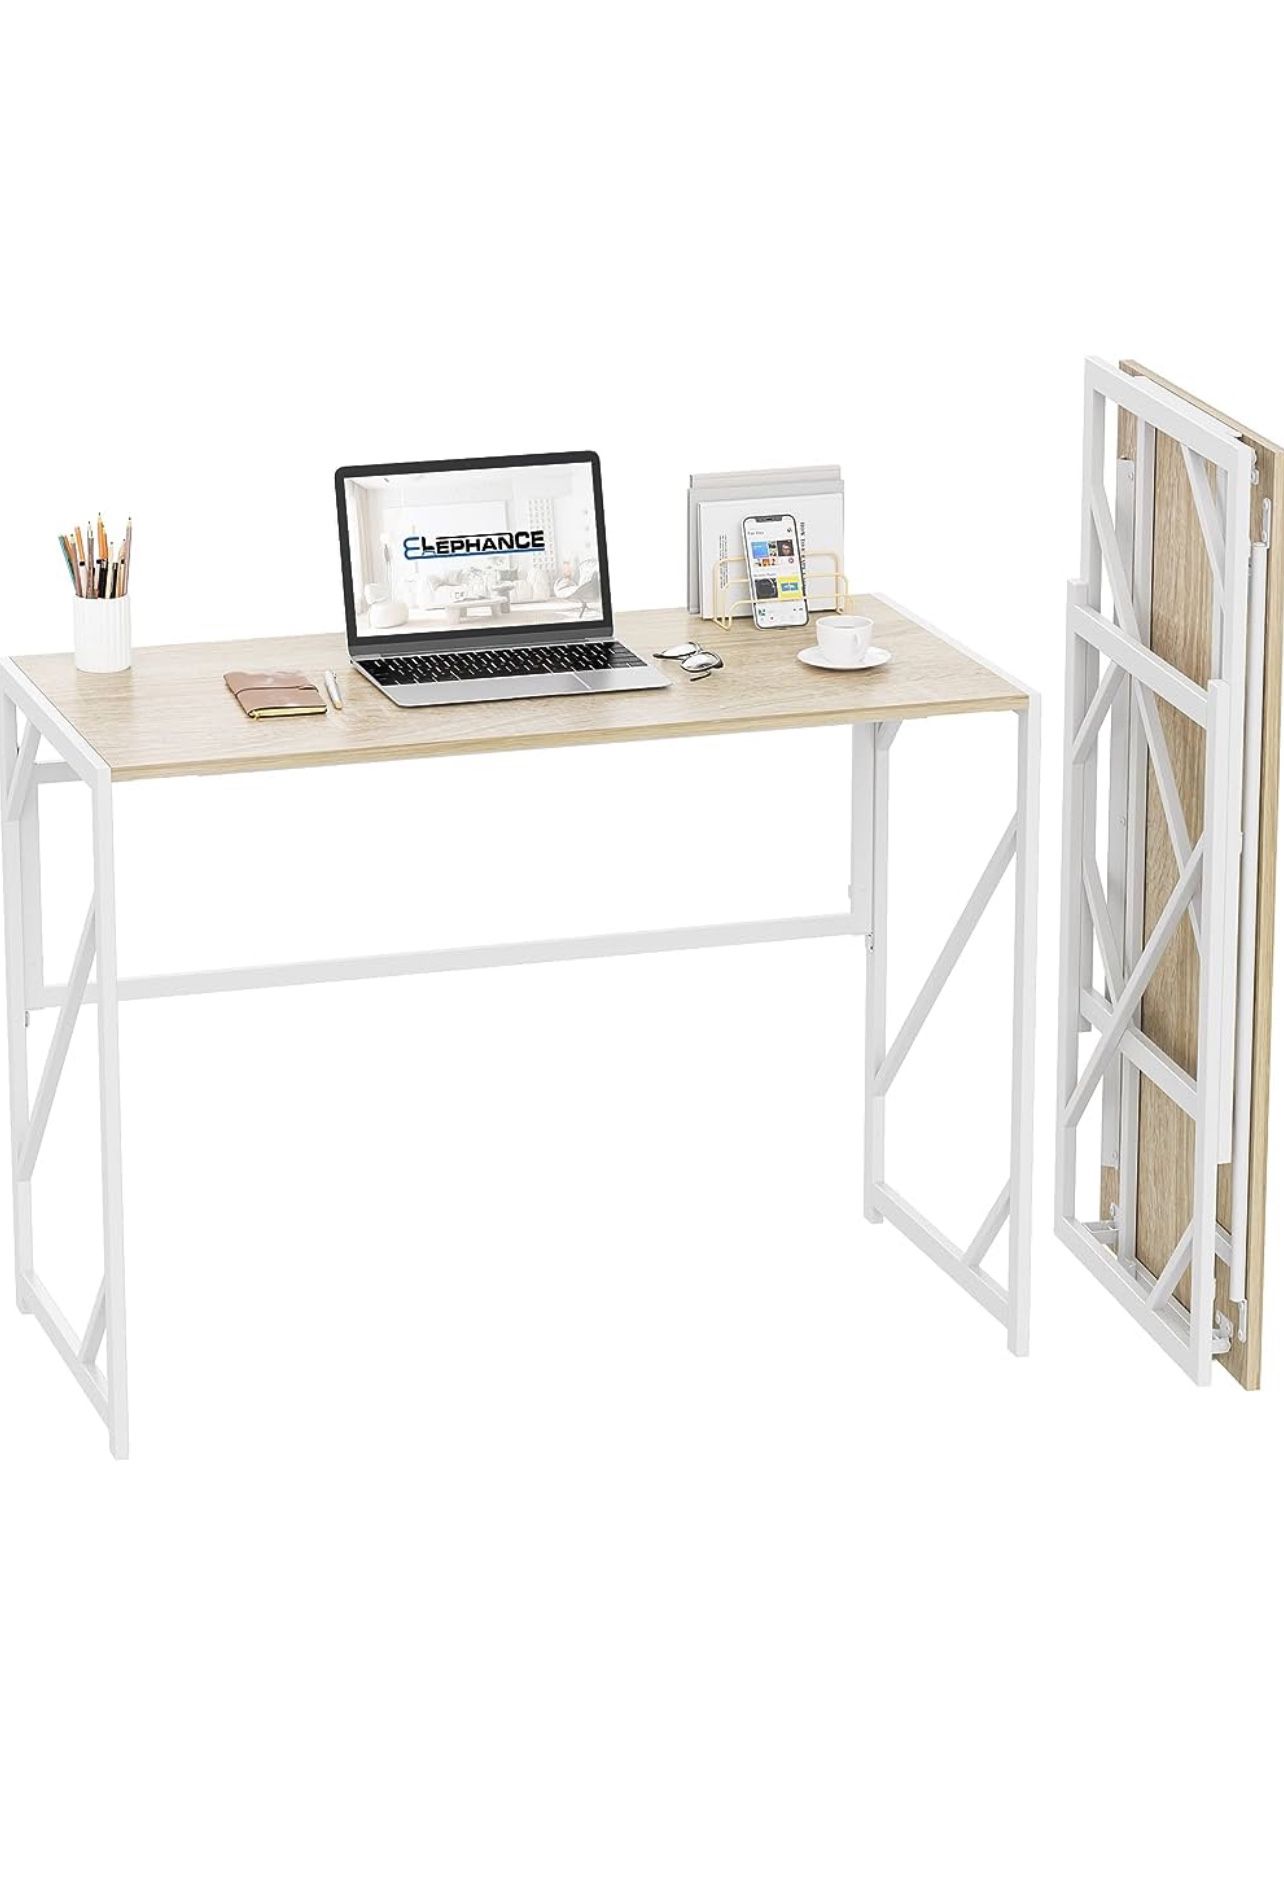 Folding Desk Writing Computer Desk For Home Office, No-Assembly Study Office Desk Foldable Table For Small Spaces 31.5 Inch Beige